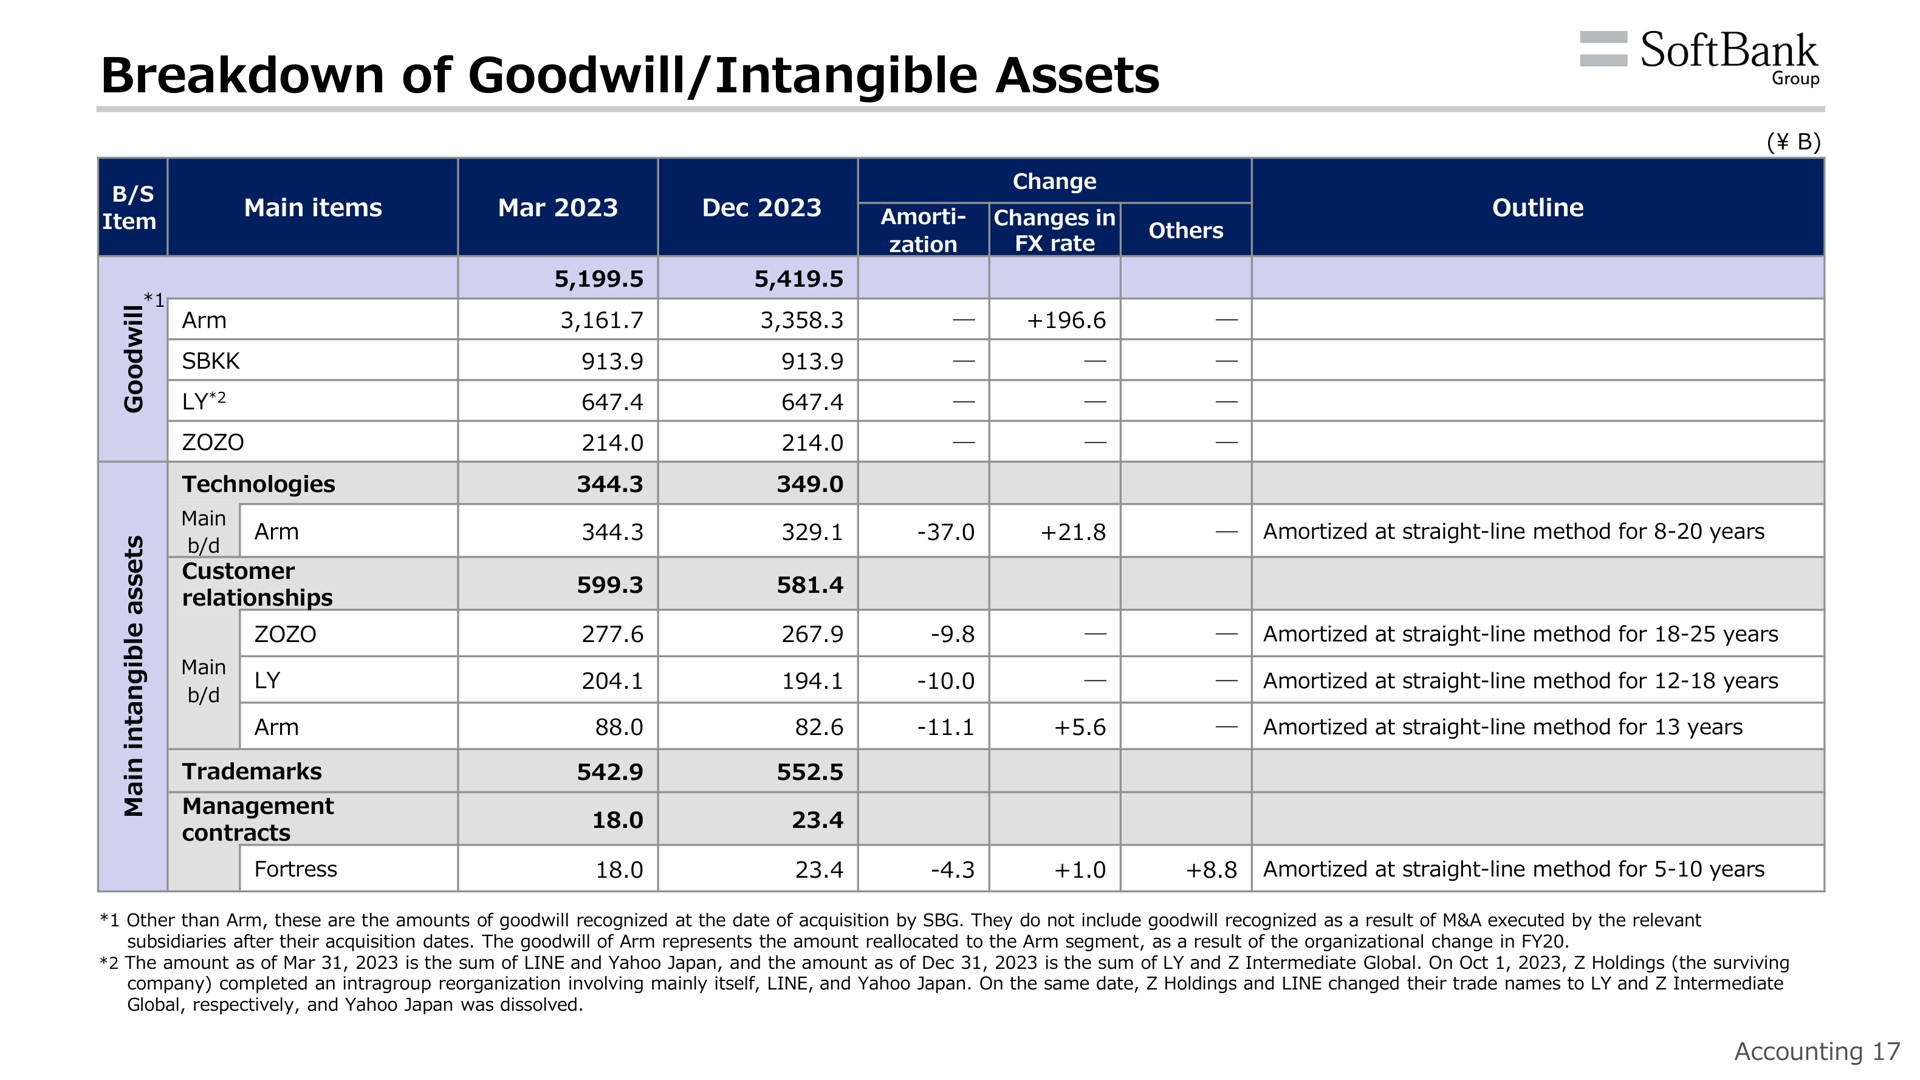 breakdown of goodwill intangible assets | SoftBank